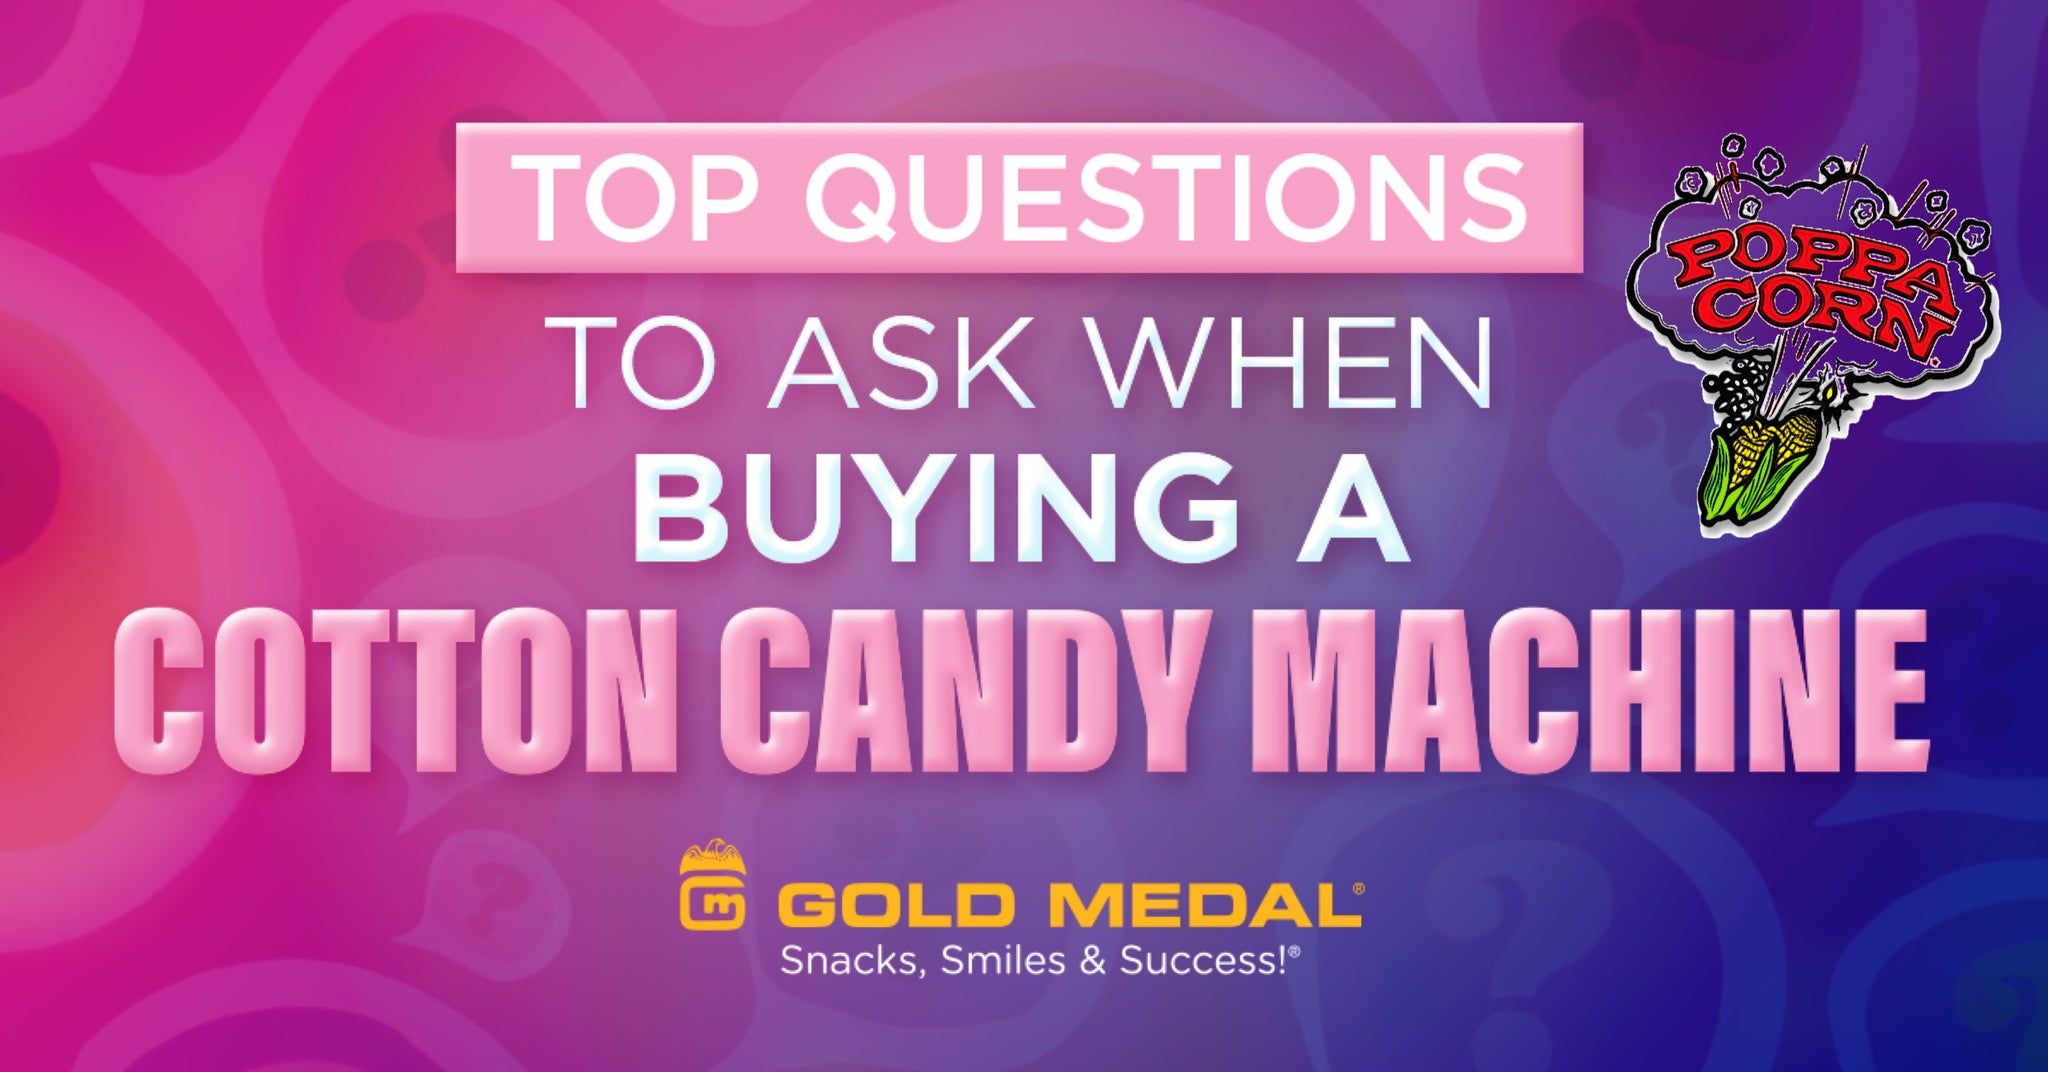 Top Questions to Ask When Buying a Cotton Candy Machine